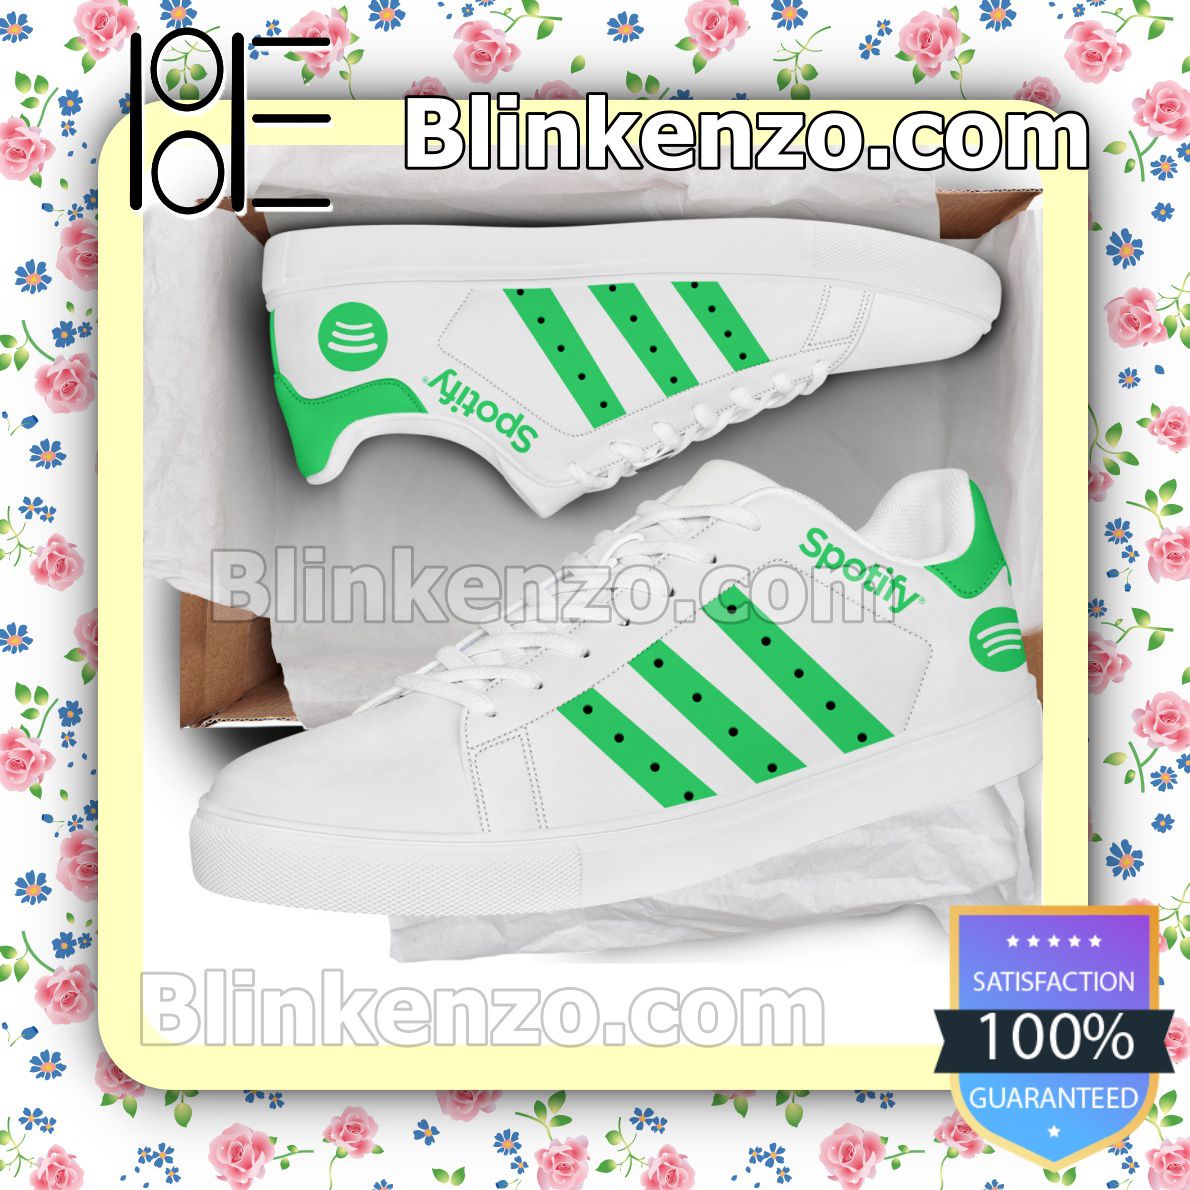 Independiente Actor Antagonista Spotify Music Company Brand Adidas Low Top Shoes - Blinkenzo